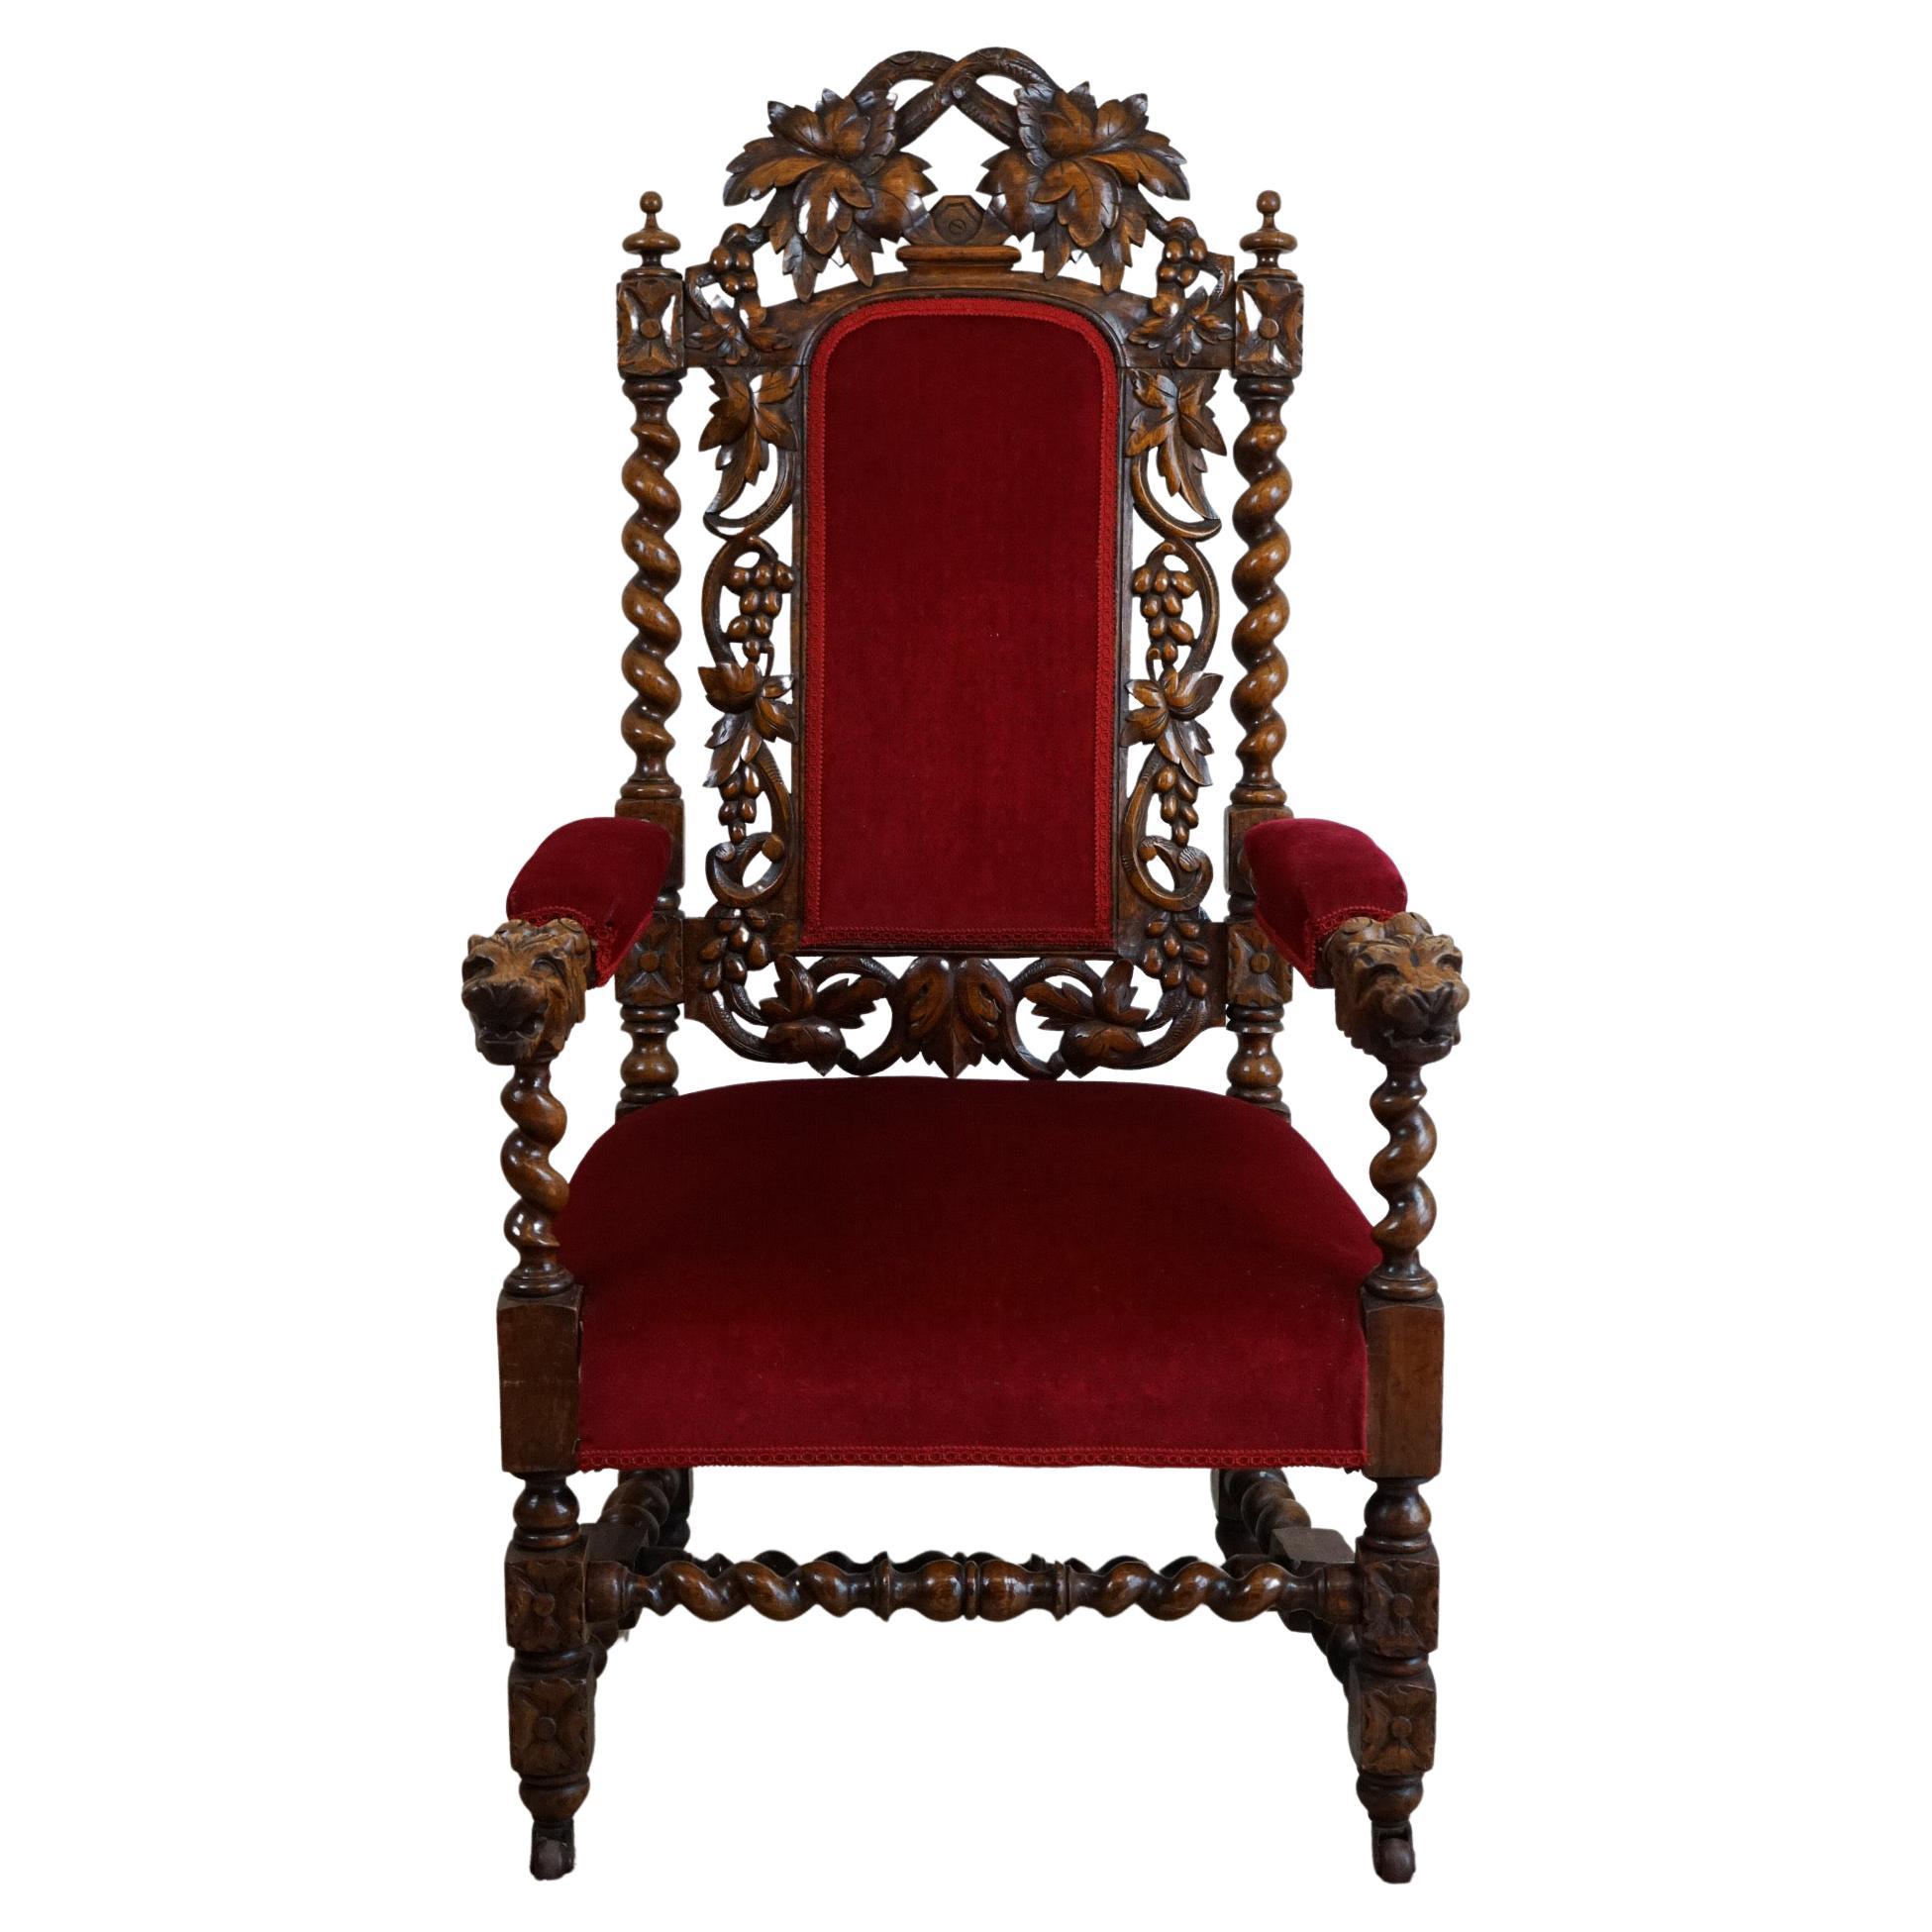 Victorian Jacobean Revival Carvedornate Throne Chair For Sale